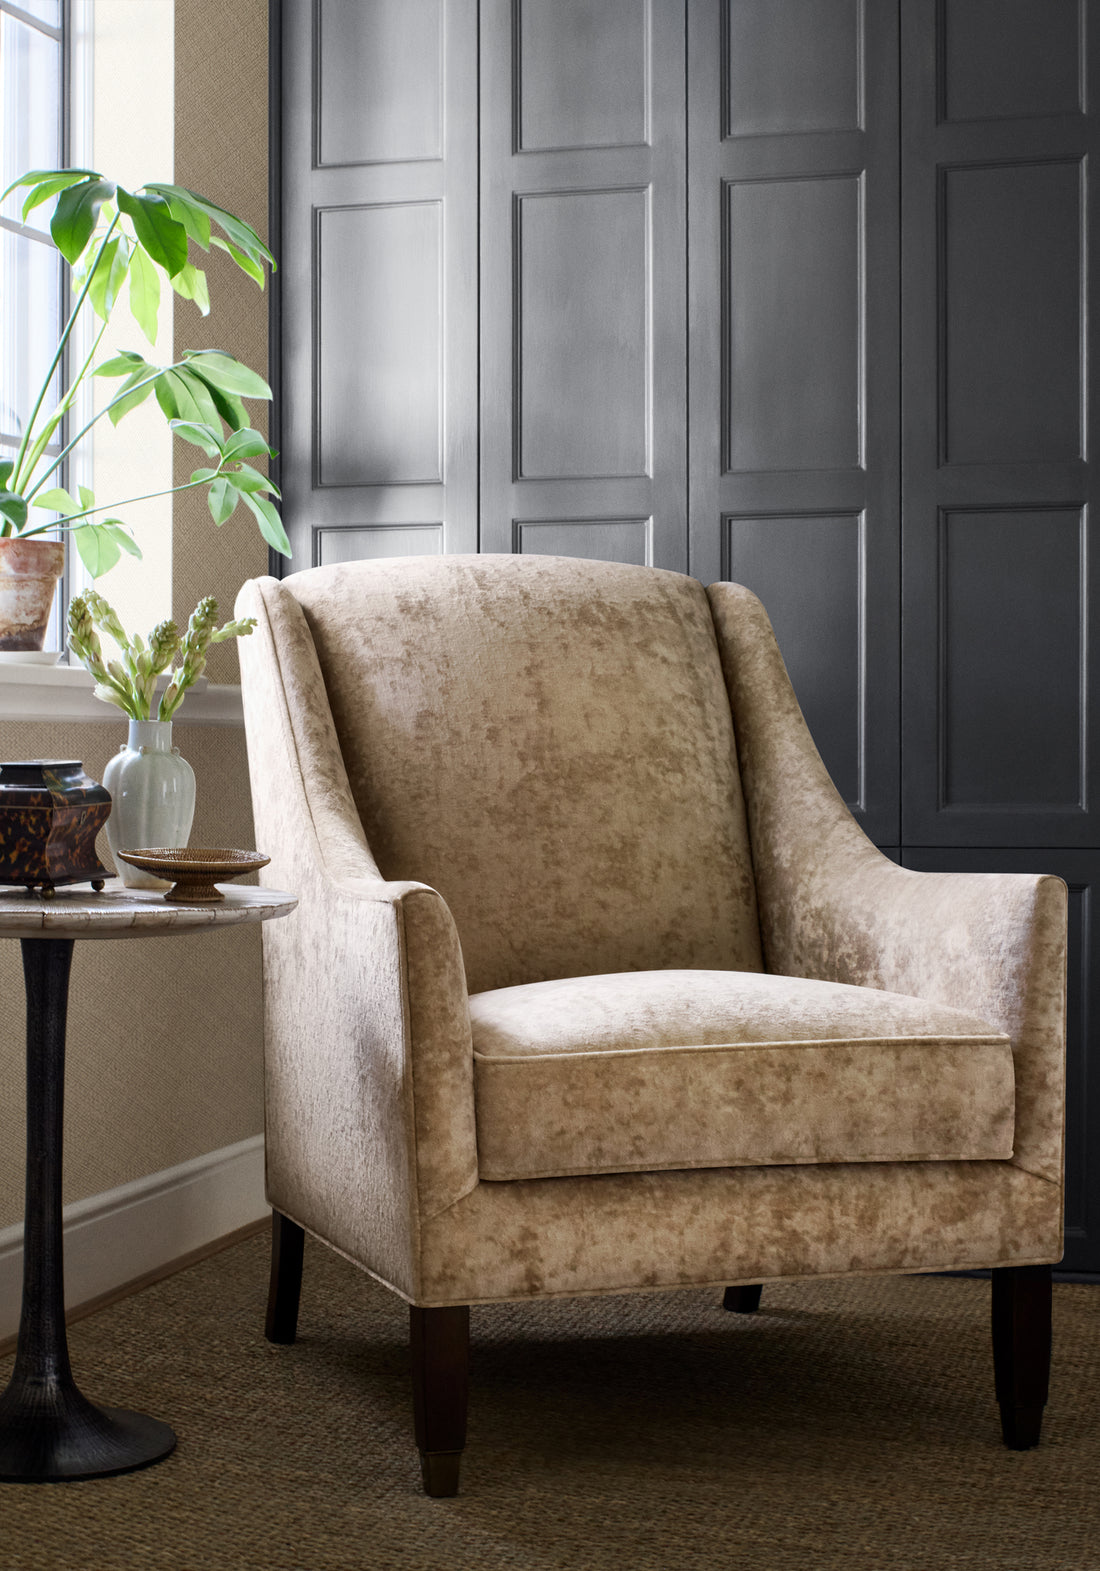 Wing chair with sunlight  in Celeste Velvet fabric in camel color - pattern number W8968 - by Thibaut in the Lyra Velvets collection